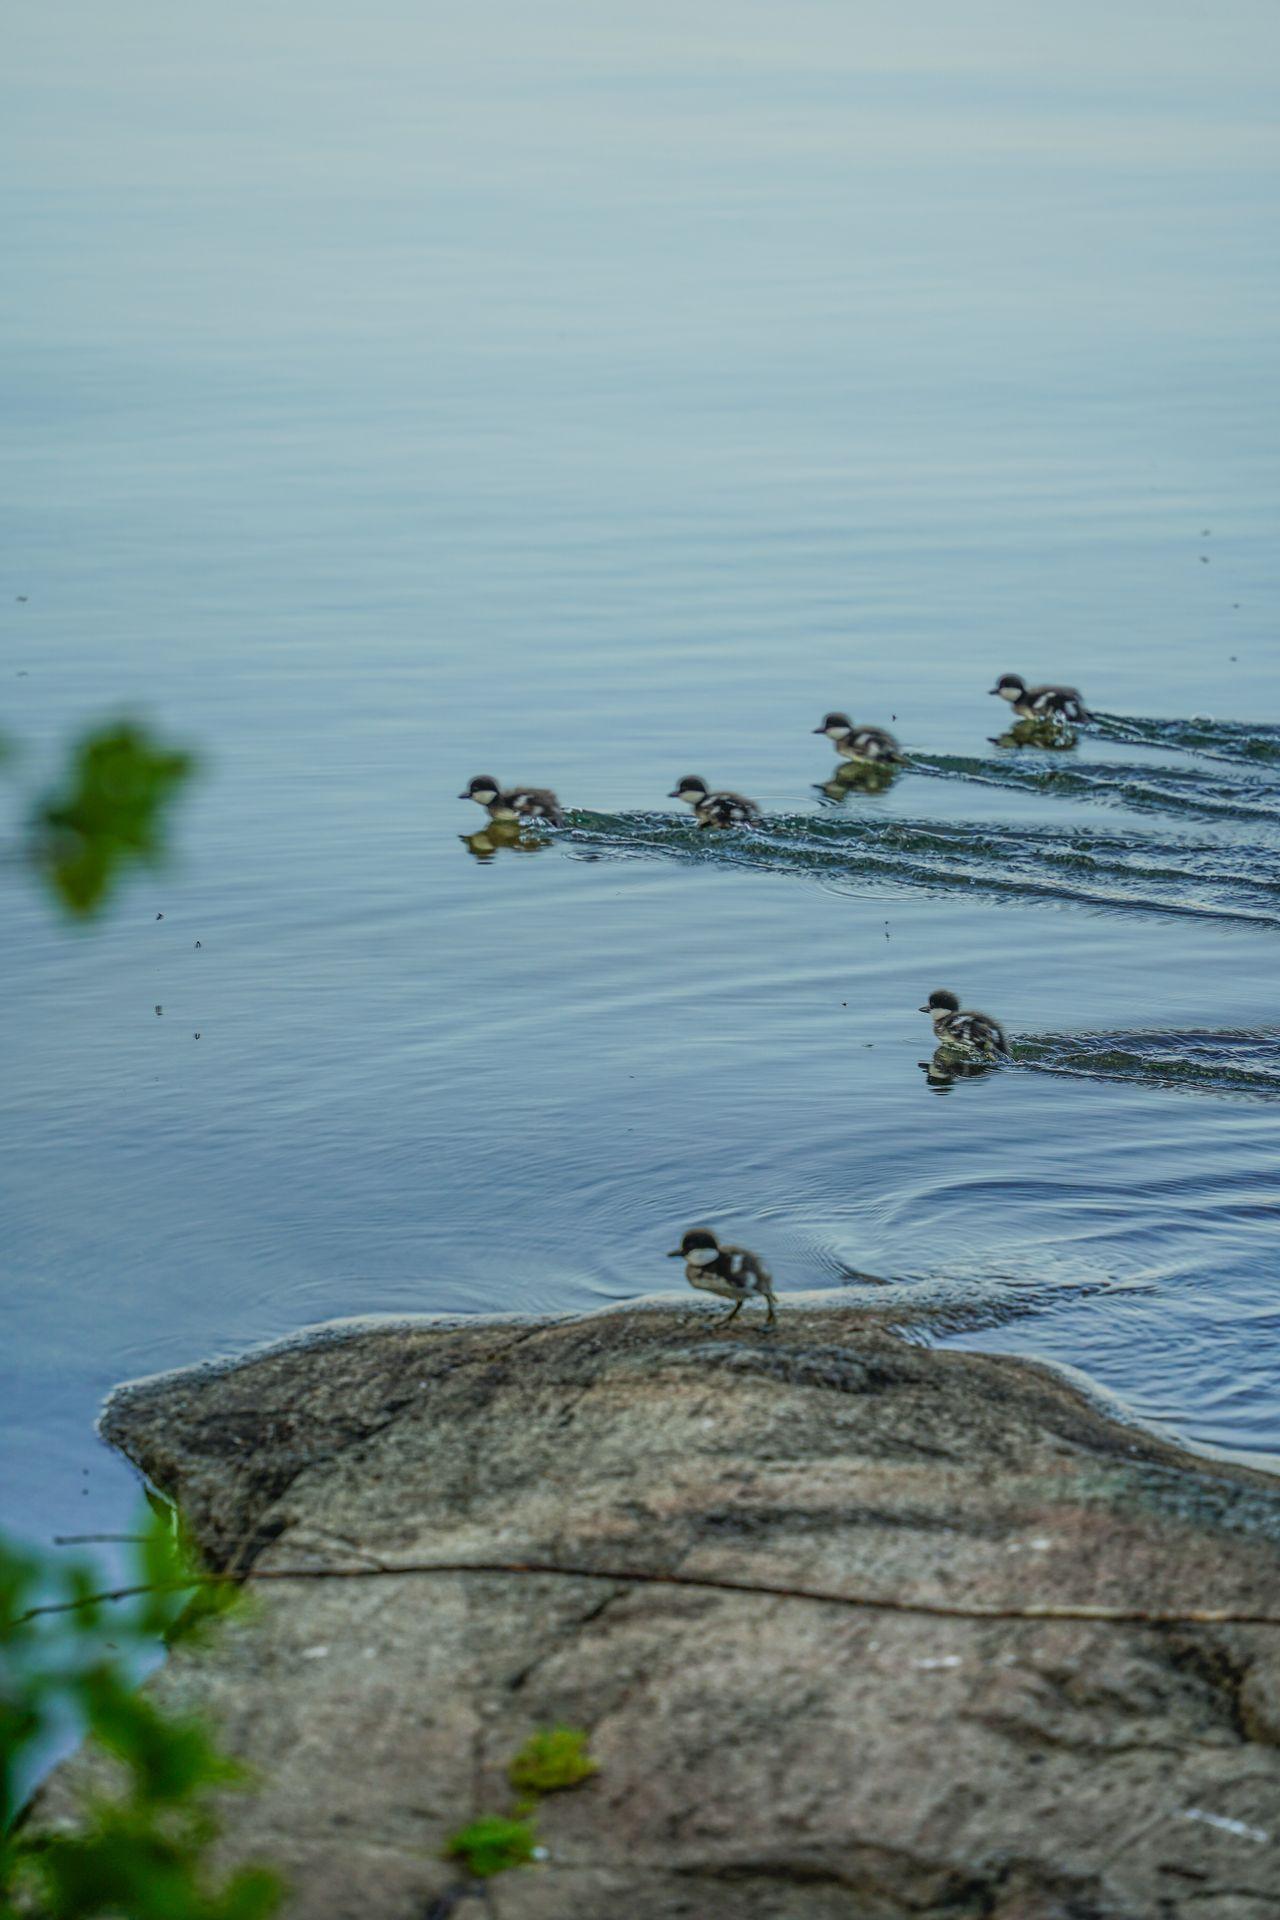 6 baby ducks skidding on top of the water.